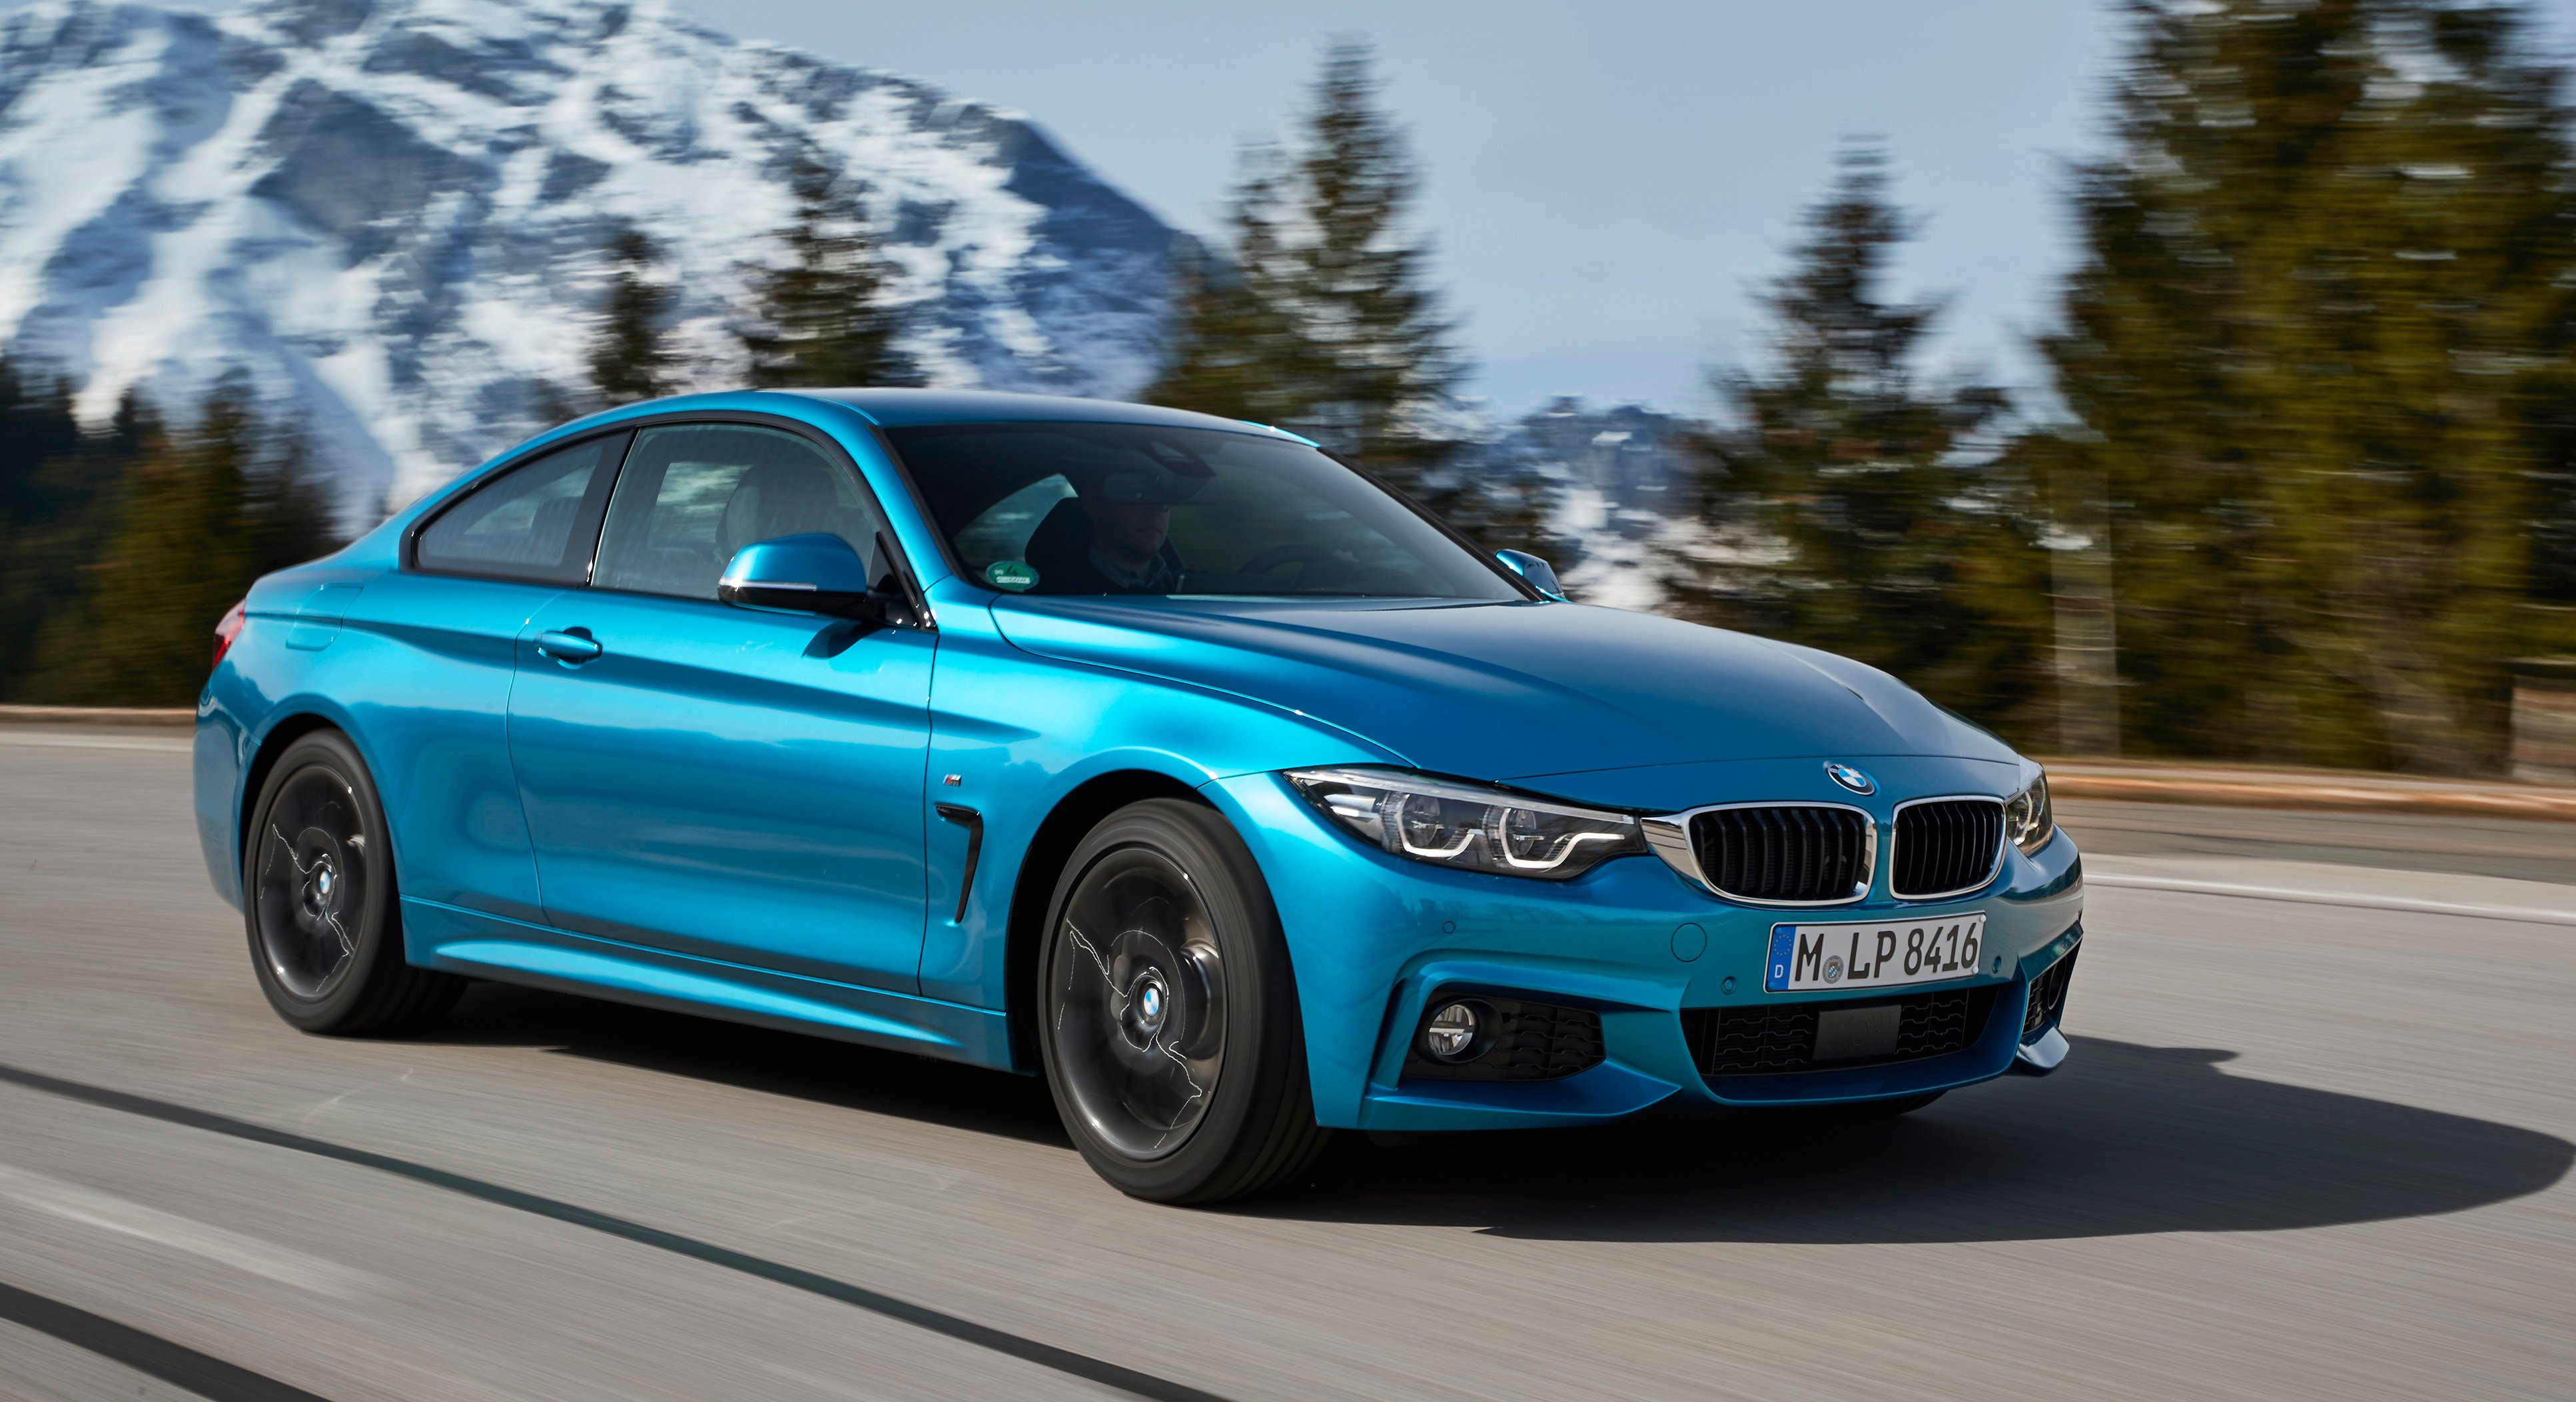 2017 BMW 4 Series pricing and specs - Photos (1 of 8)